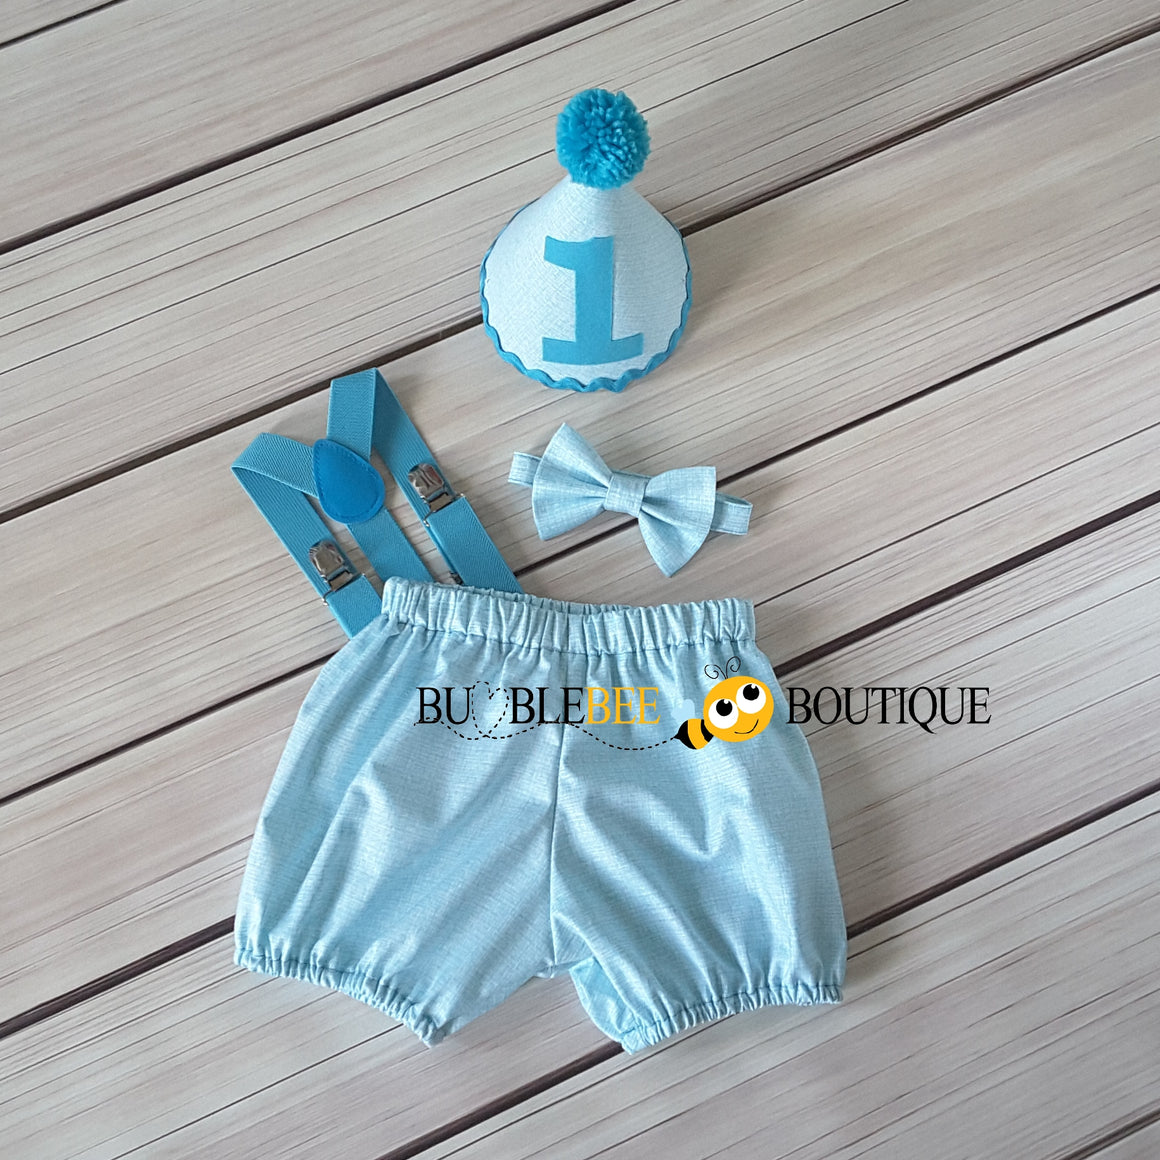 Turquoise Colour Weave Boys Cake Smash Outfit by Bumblebee Boutique